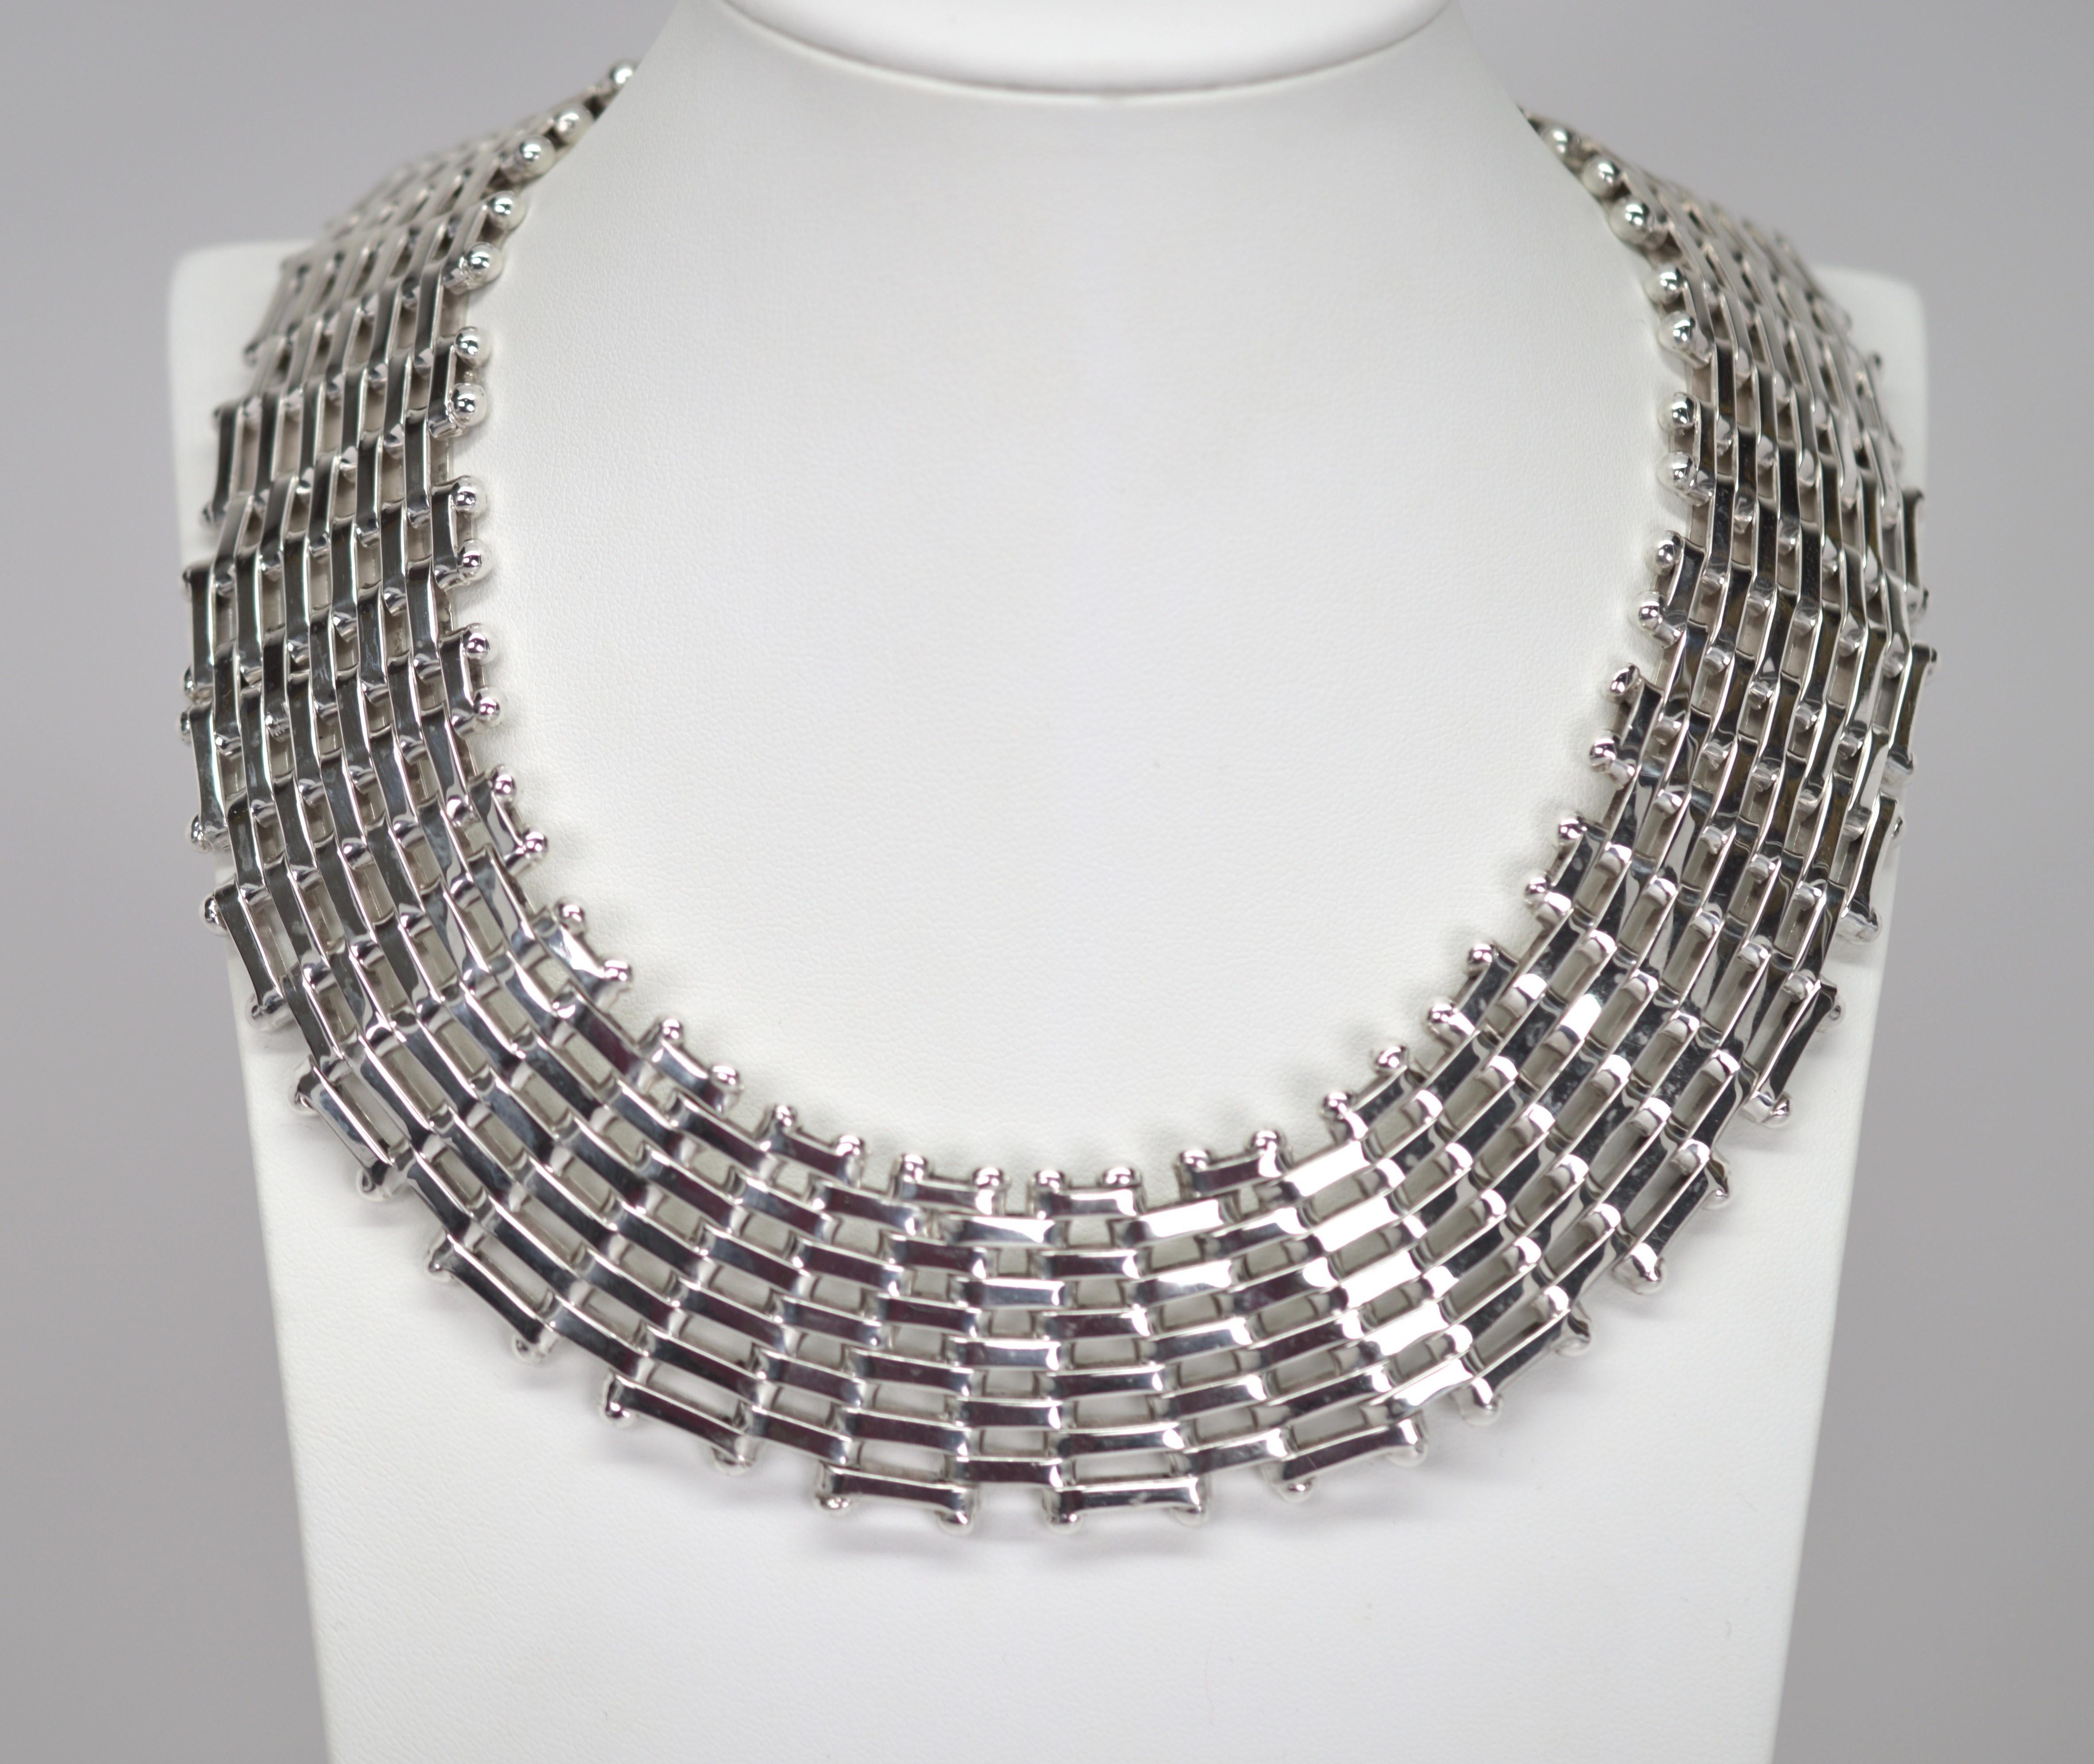 Let this bold sterling silver collar necklace lead when accessorizing your look. This fantastic retro find can uplift wardrobe basics to greatness when pairing with an outfit such as with a crisp white open collar blouse, jeans and a blazer or a